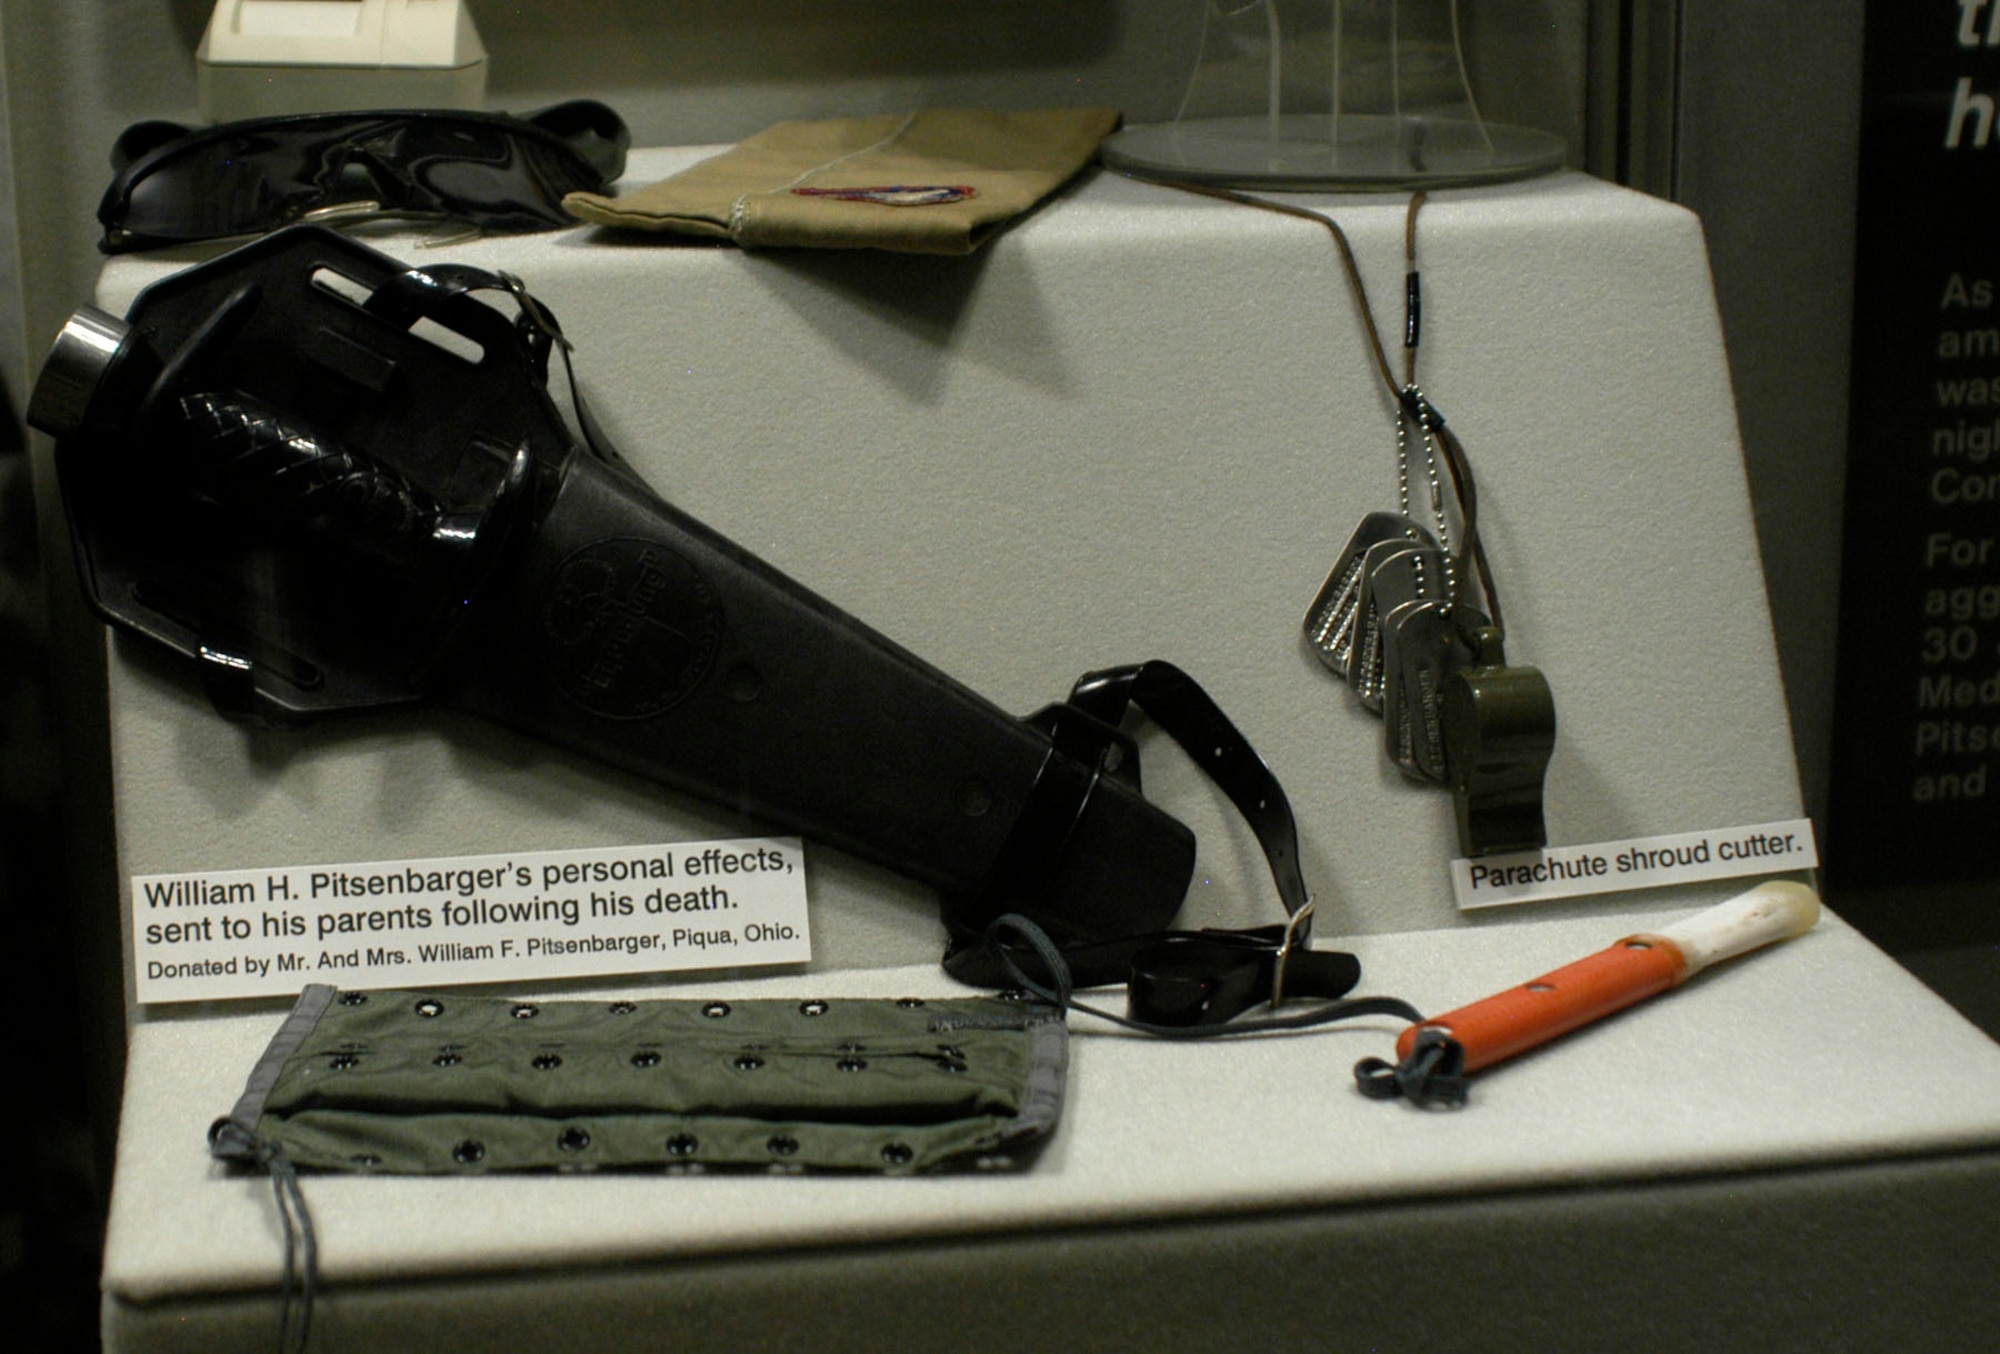 DAYTON, Ohio - William H. Pitsenbarger's personal effects sent to his parents following his death. These items are on display in the Southeast Asia War Gallery at the National Museum of the U.S. Air Force. (U.S. Air Force photo)